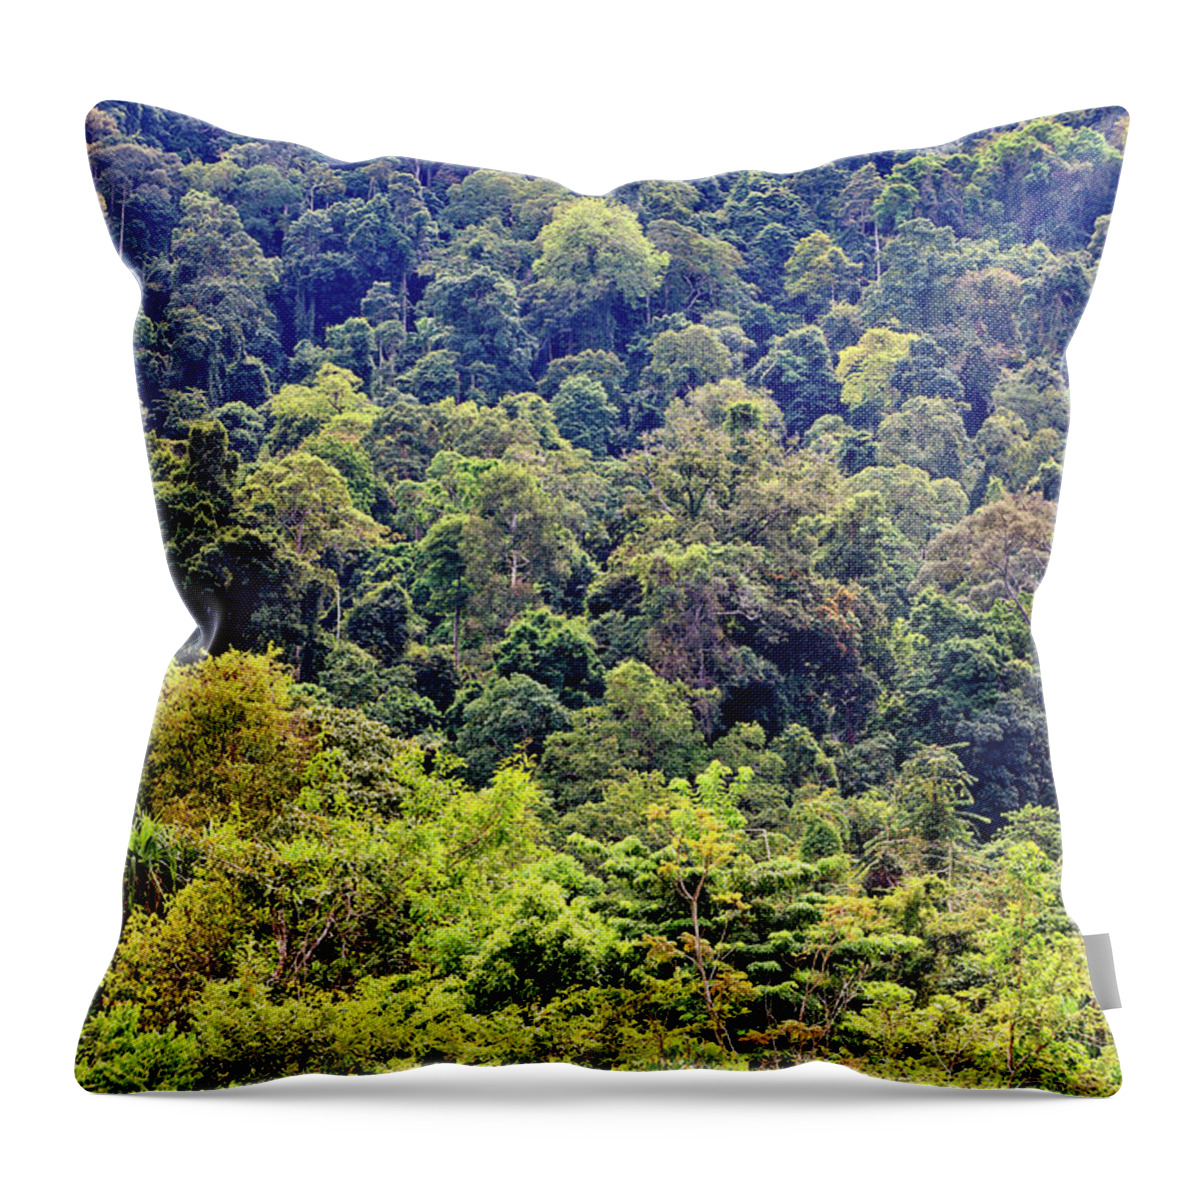 Tropical Rainforest Throw Pillow featuring the photograph Rainforest by Fredfroese